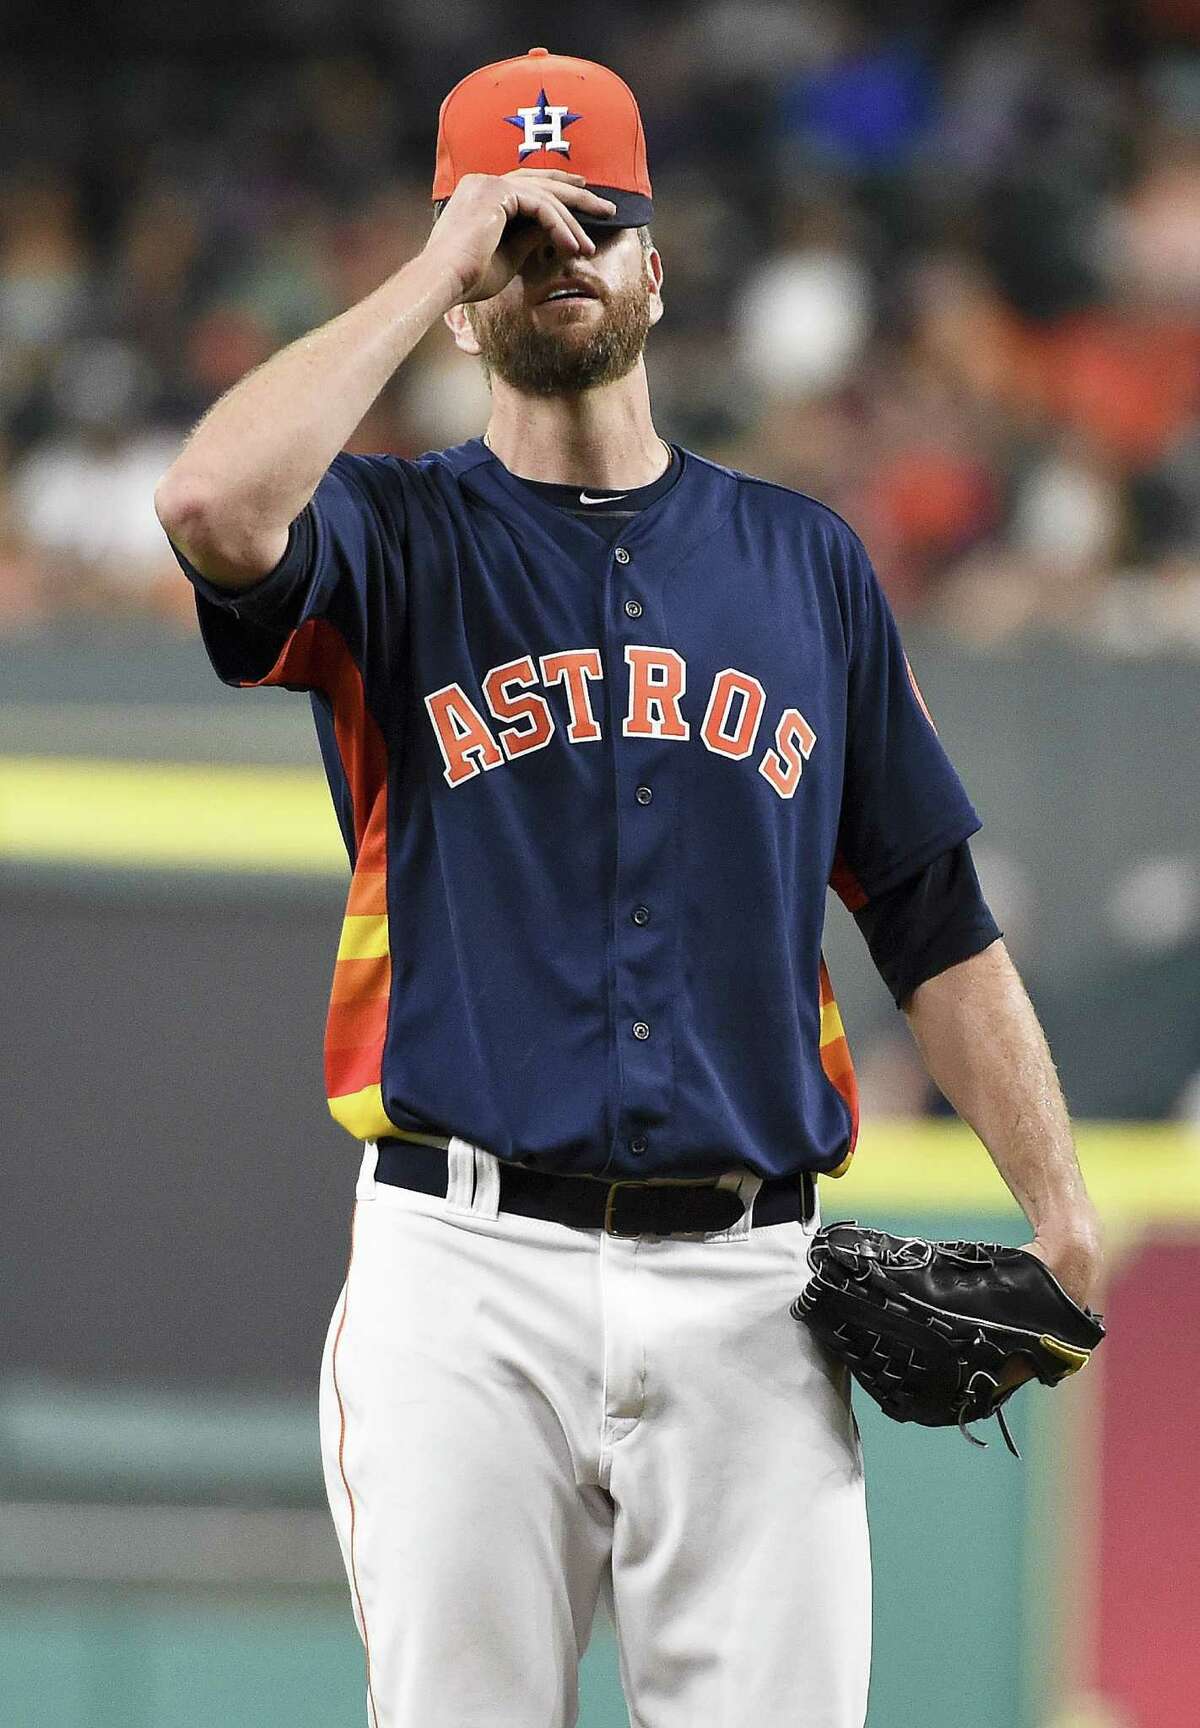 April 24: Red Sox 7, Astros 5 (12 innings) HOUSTON, TX - APRIL 24: Scott Feldman #46 of the Houston Astros reacts after giving up an RBI single to Brock Holt #12 of the Boston Red Sox to put the Red Sox up 3-0 during the first inning at Minute Maid Park on April 24, 2016 in Houston, Texas.